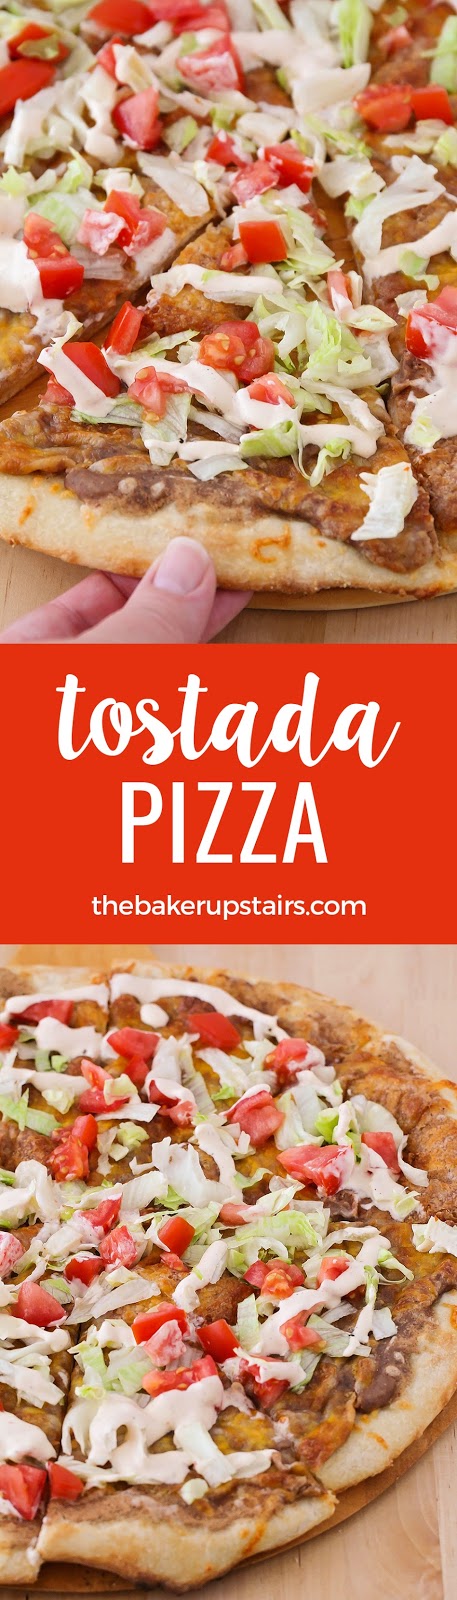 This cheesy tostada pizza is a delicious meatless meal that's super easy to make!